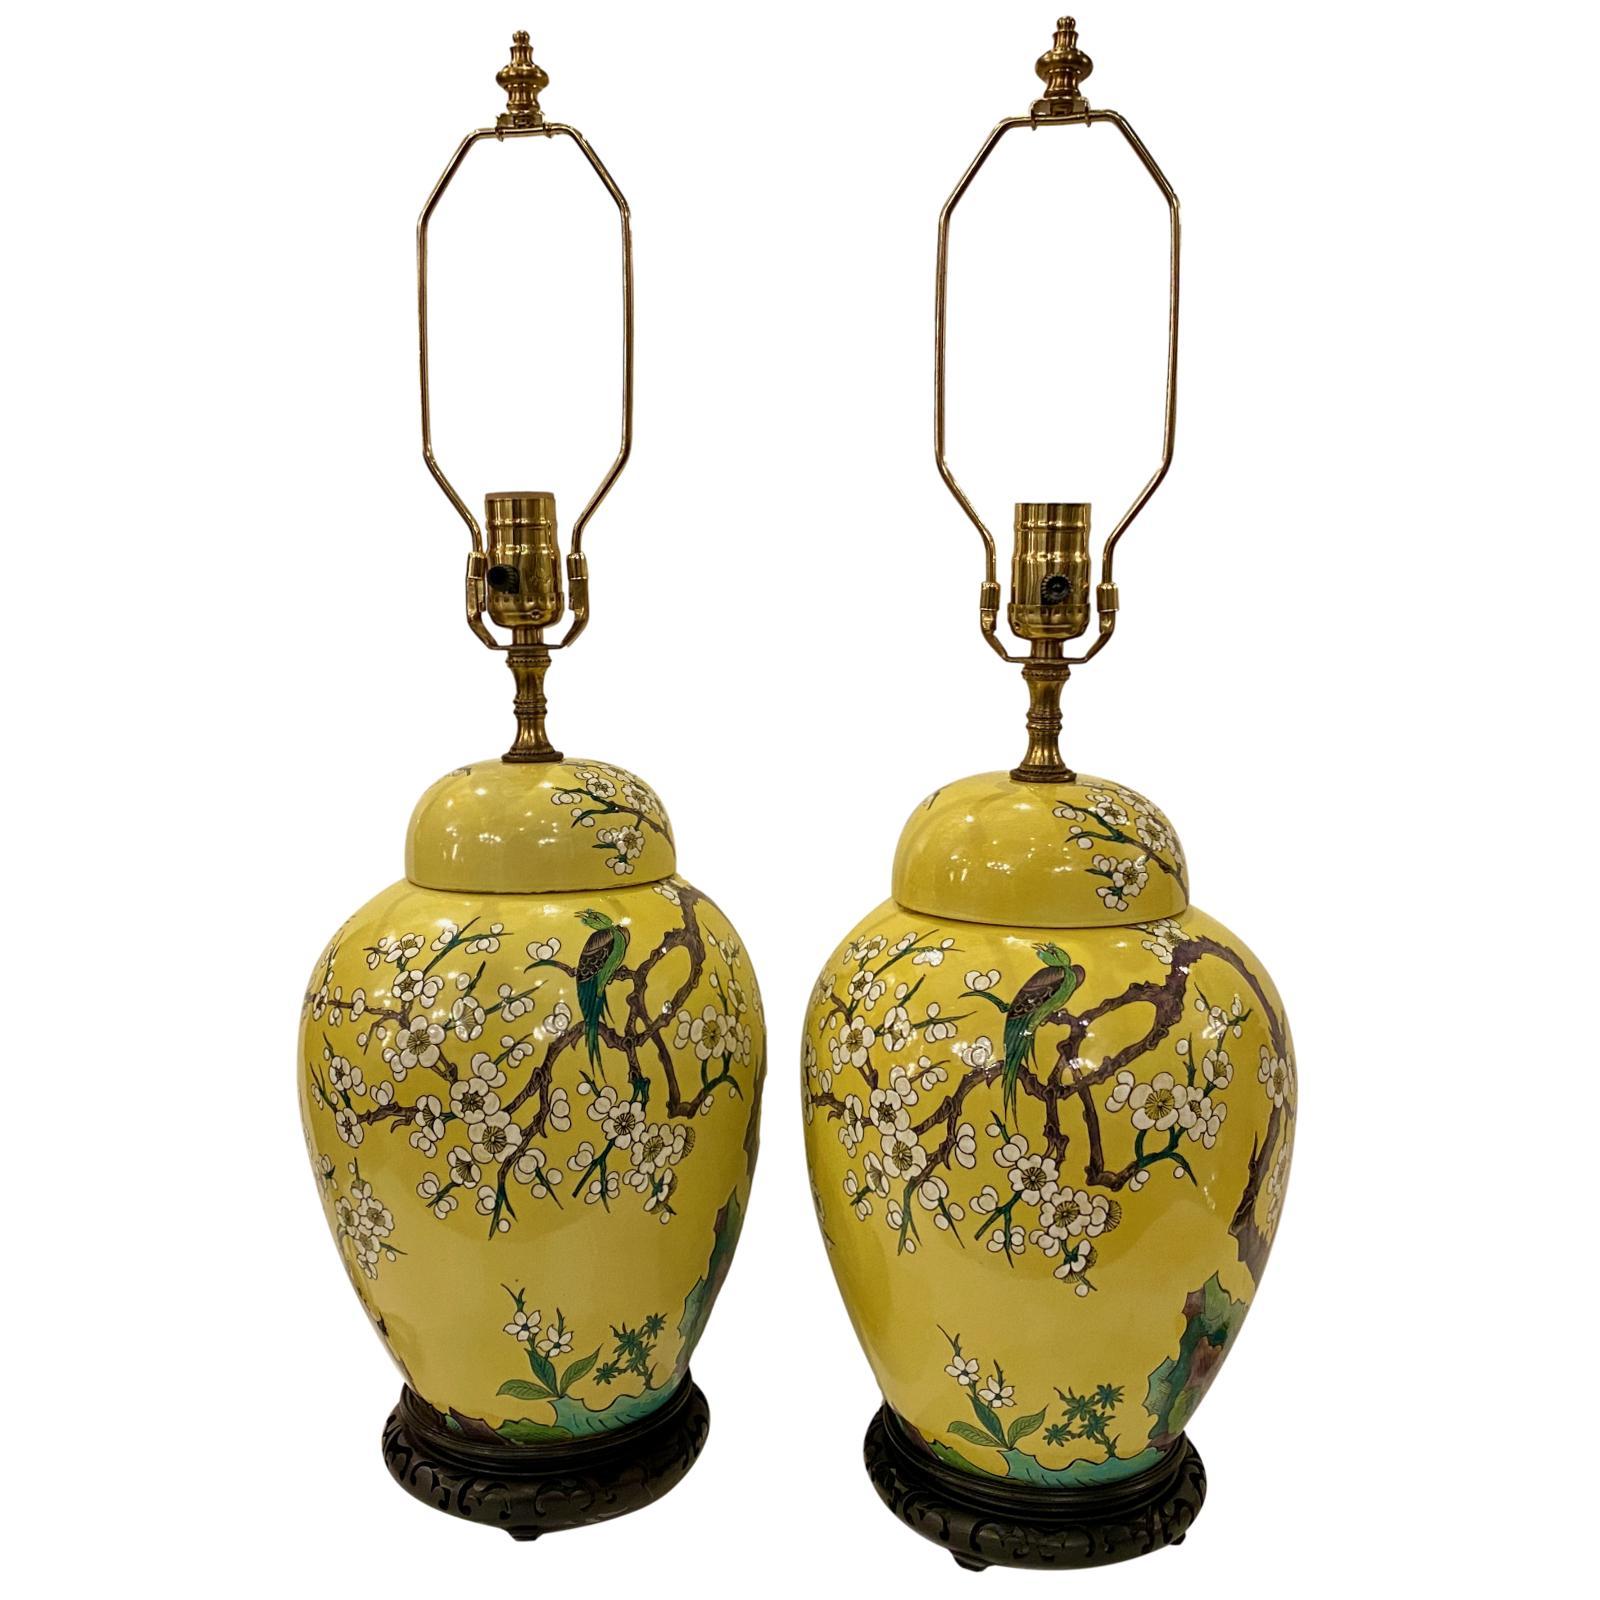 Pair of circa 1920's Chinese hand painted glazed porcelain ginger jar table lamps with flowering tree and bird motif and wood bases.

Measurements:
Height of body 14